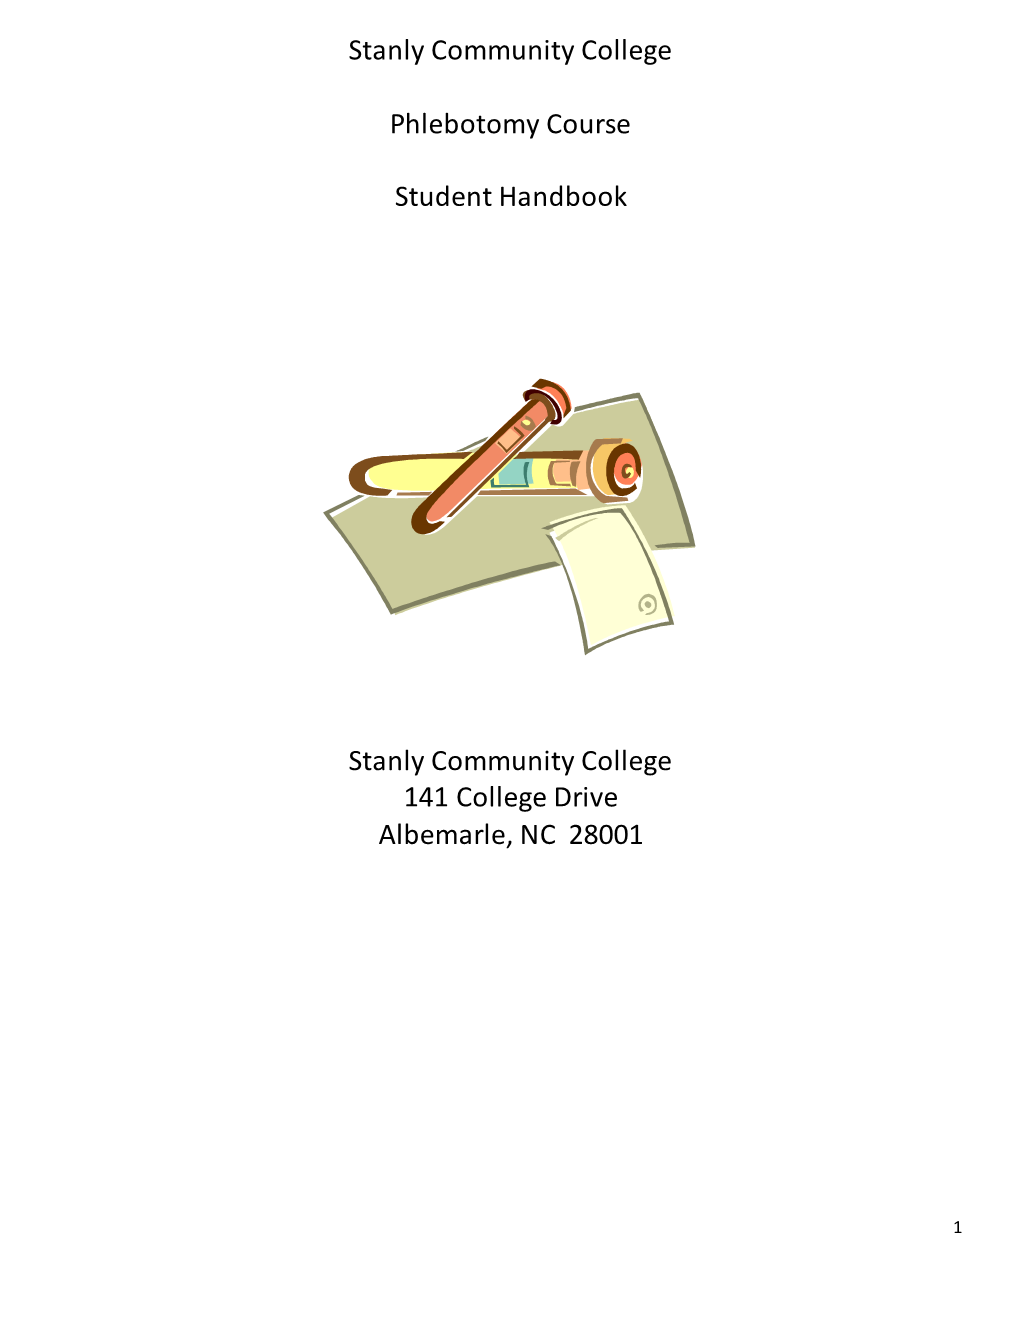 Stanly Community College Phlebotomy Course Student Handbook Stanly Community College 141 College Drive Albemarle, NC 28001